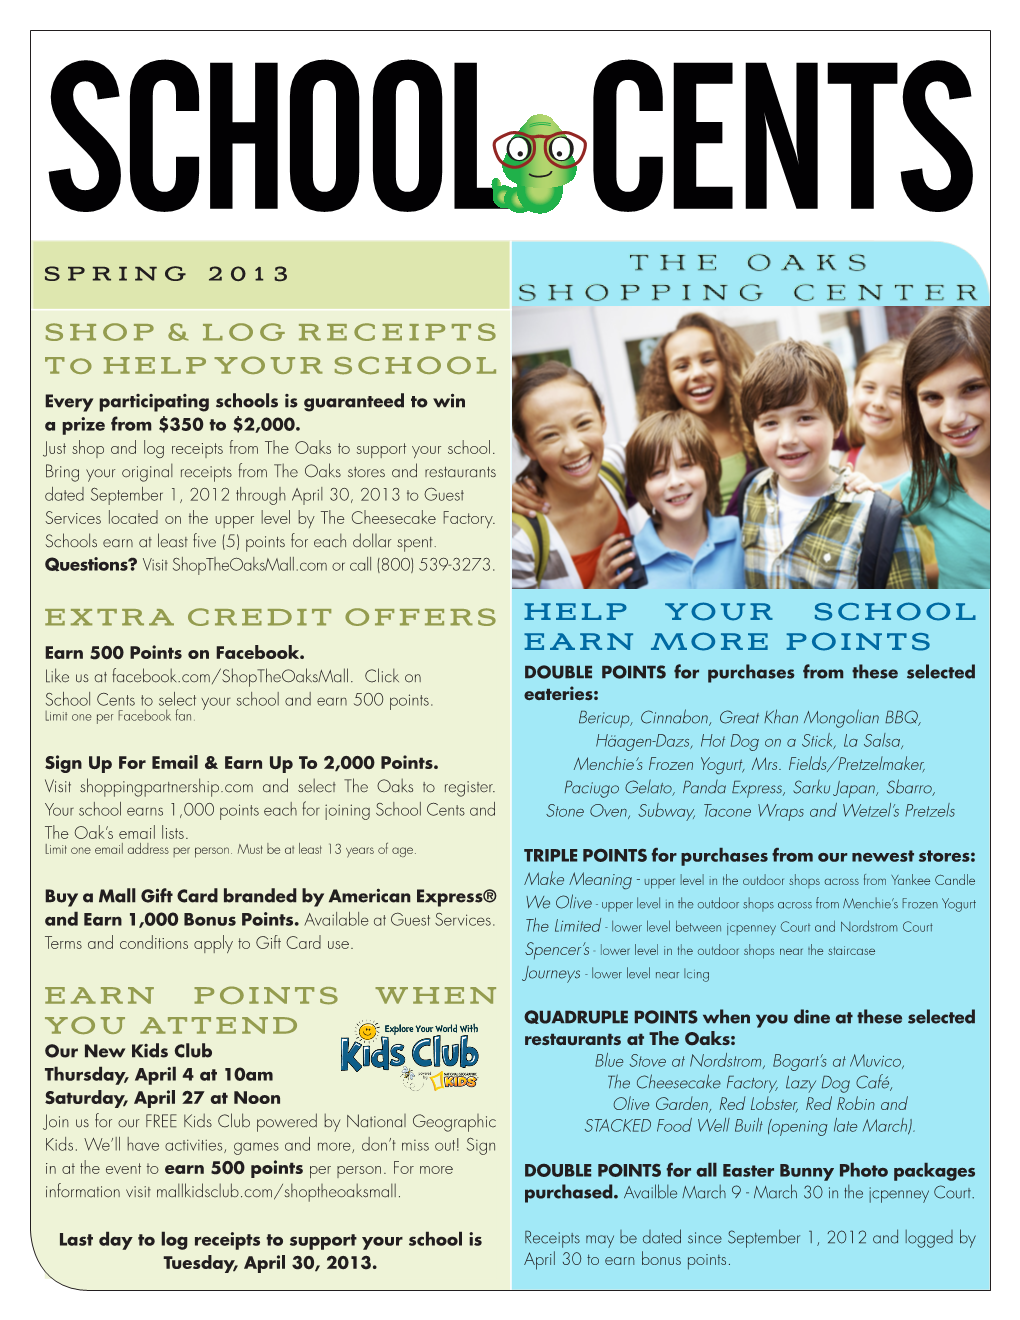 SHOP & LOG RECEIPTS to HELP YOUR SCHOOL EXTRA CREDIT